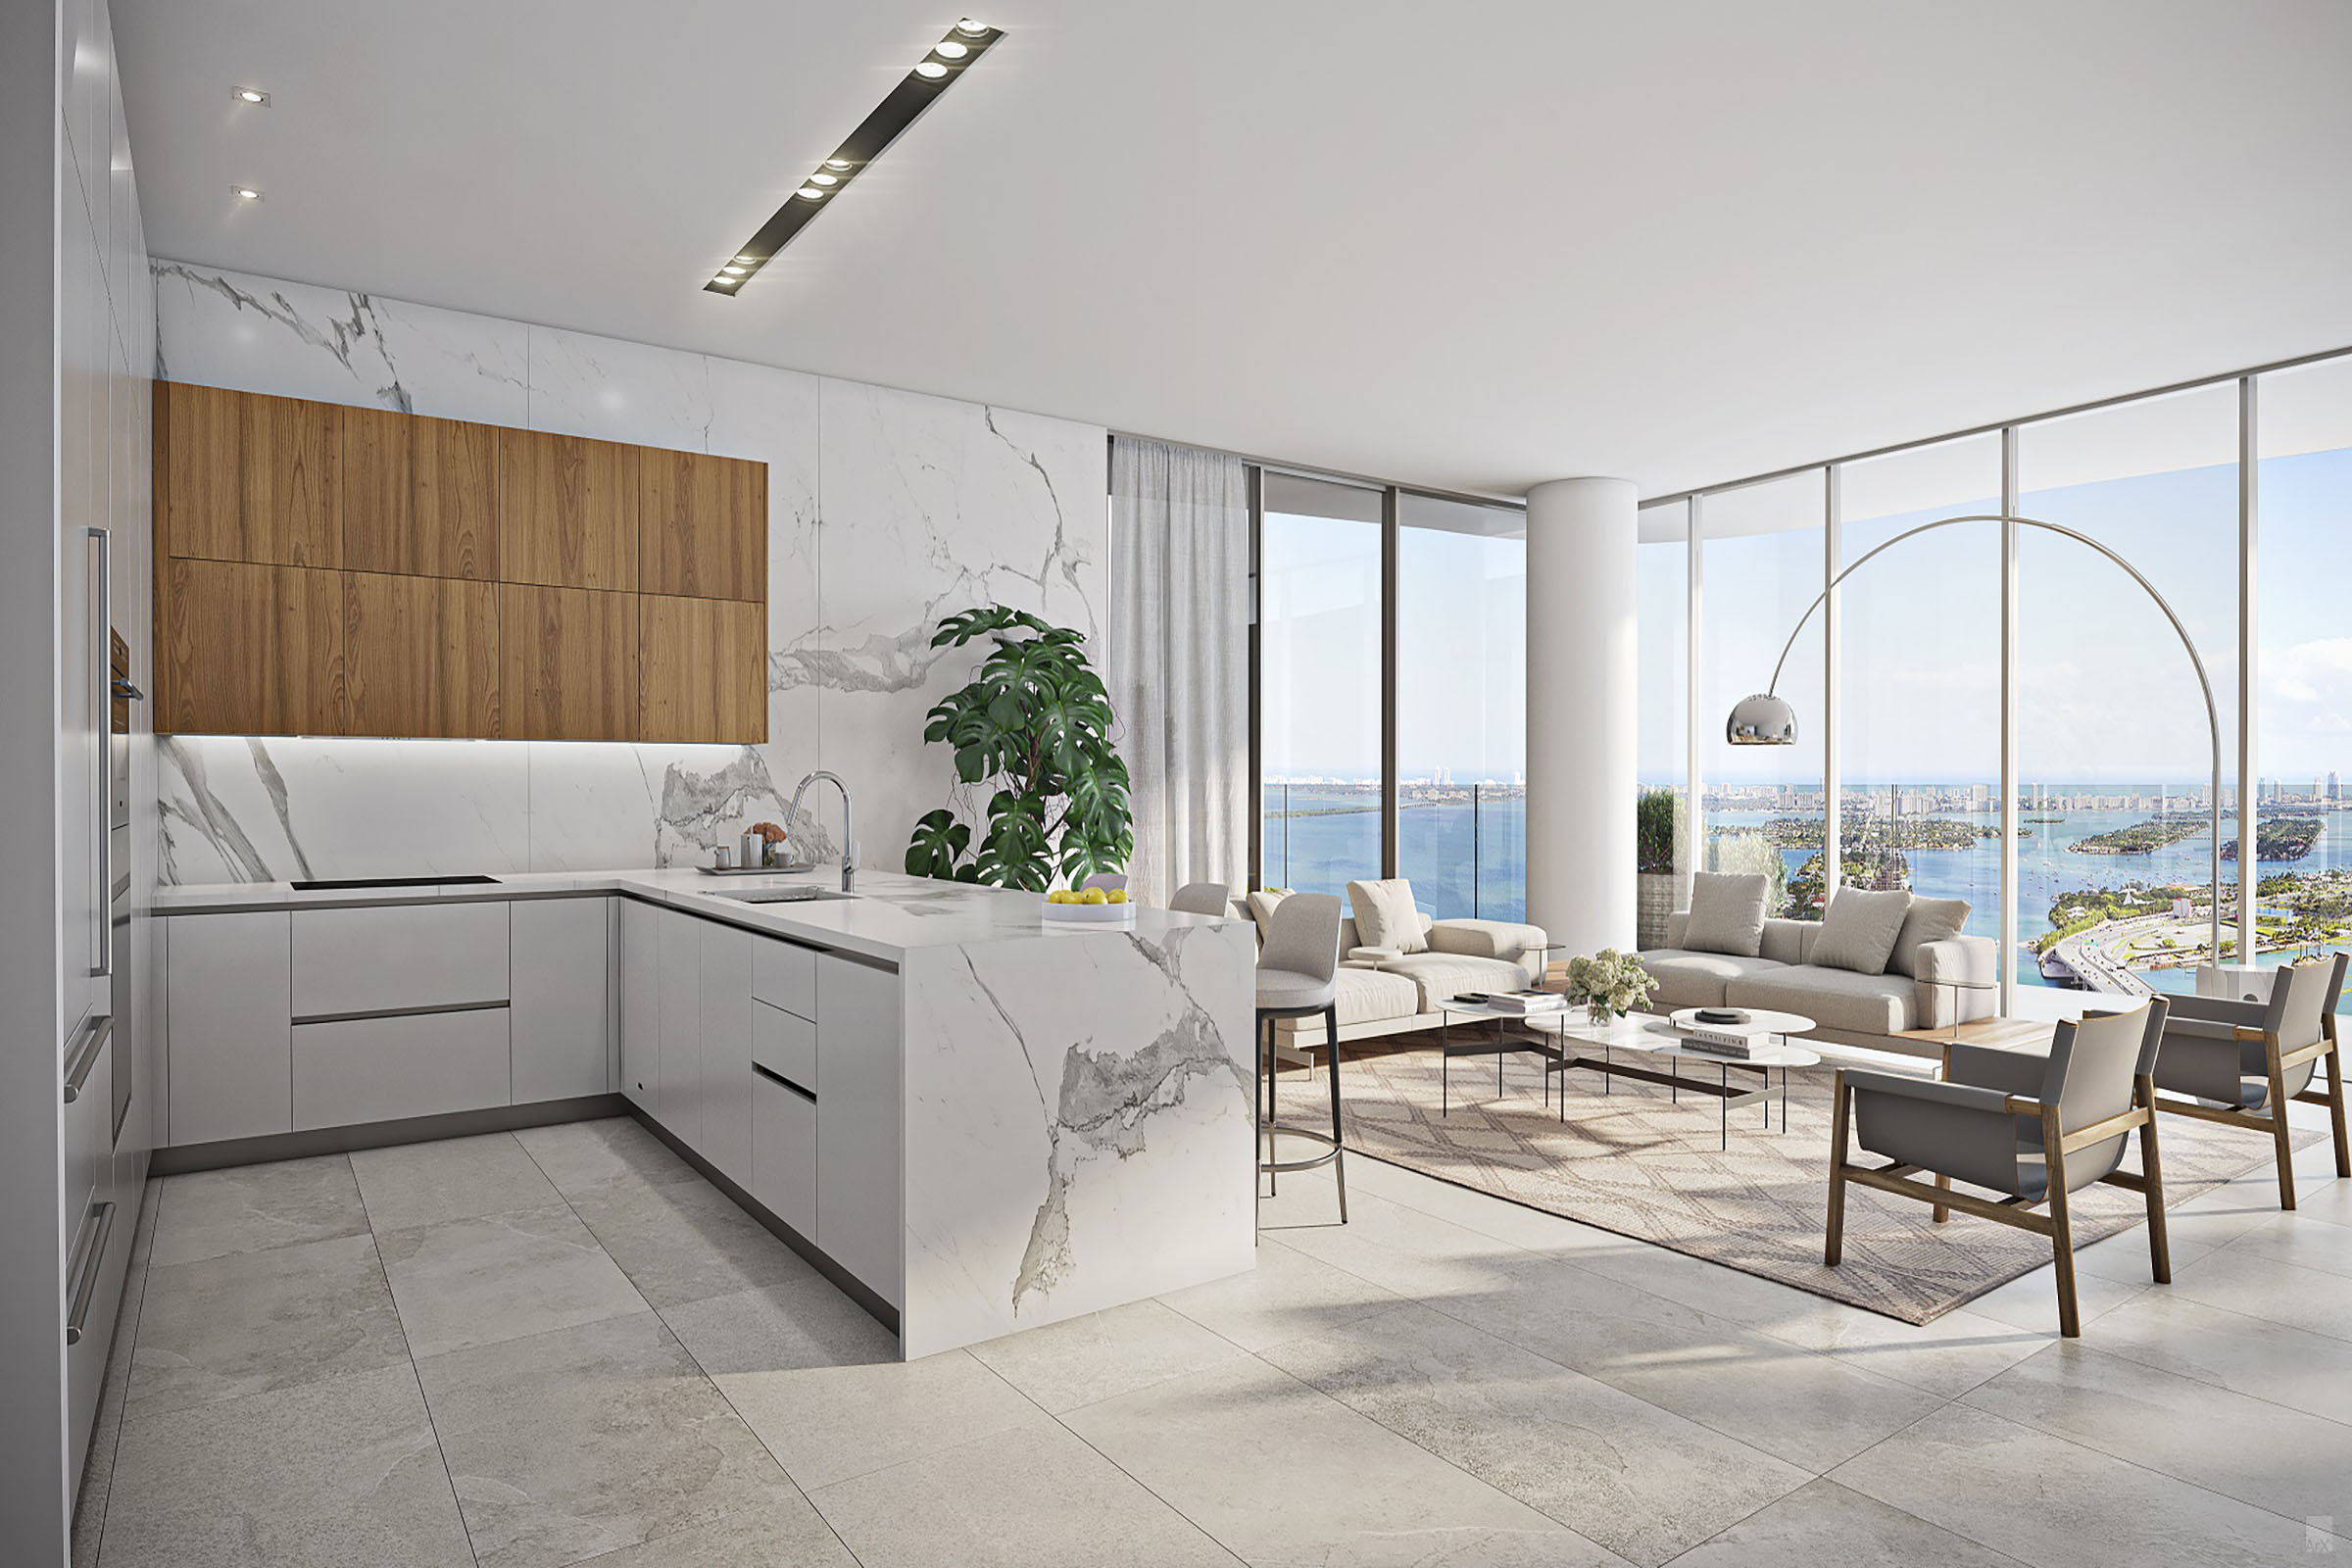 Rendering of Casa Bella Residences Kitchen and Living Room Flow Through